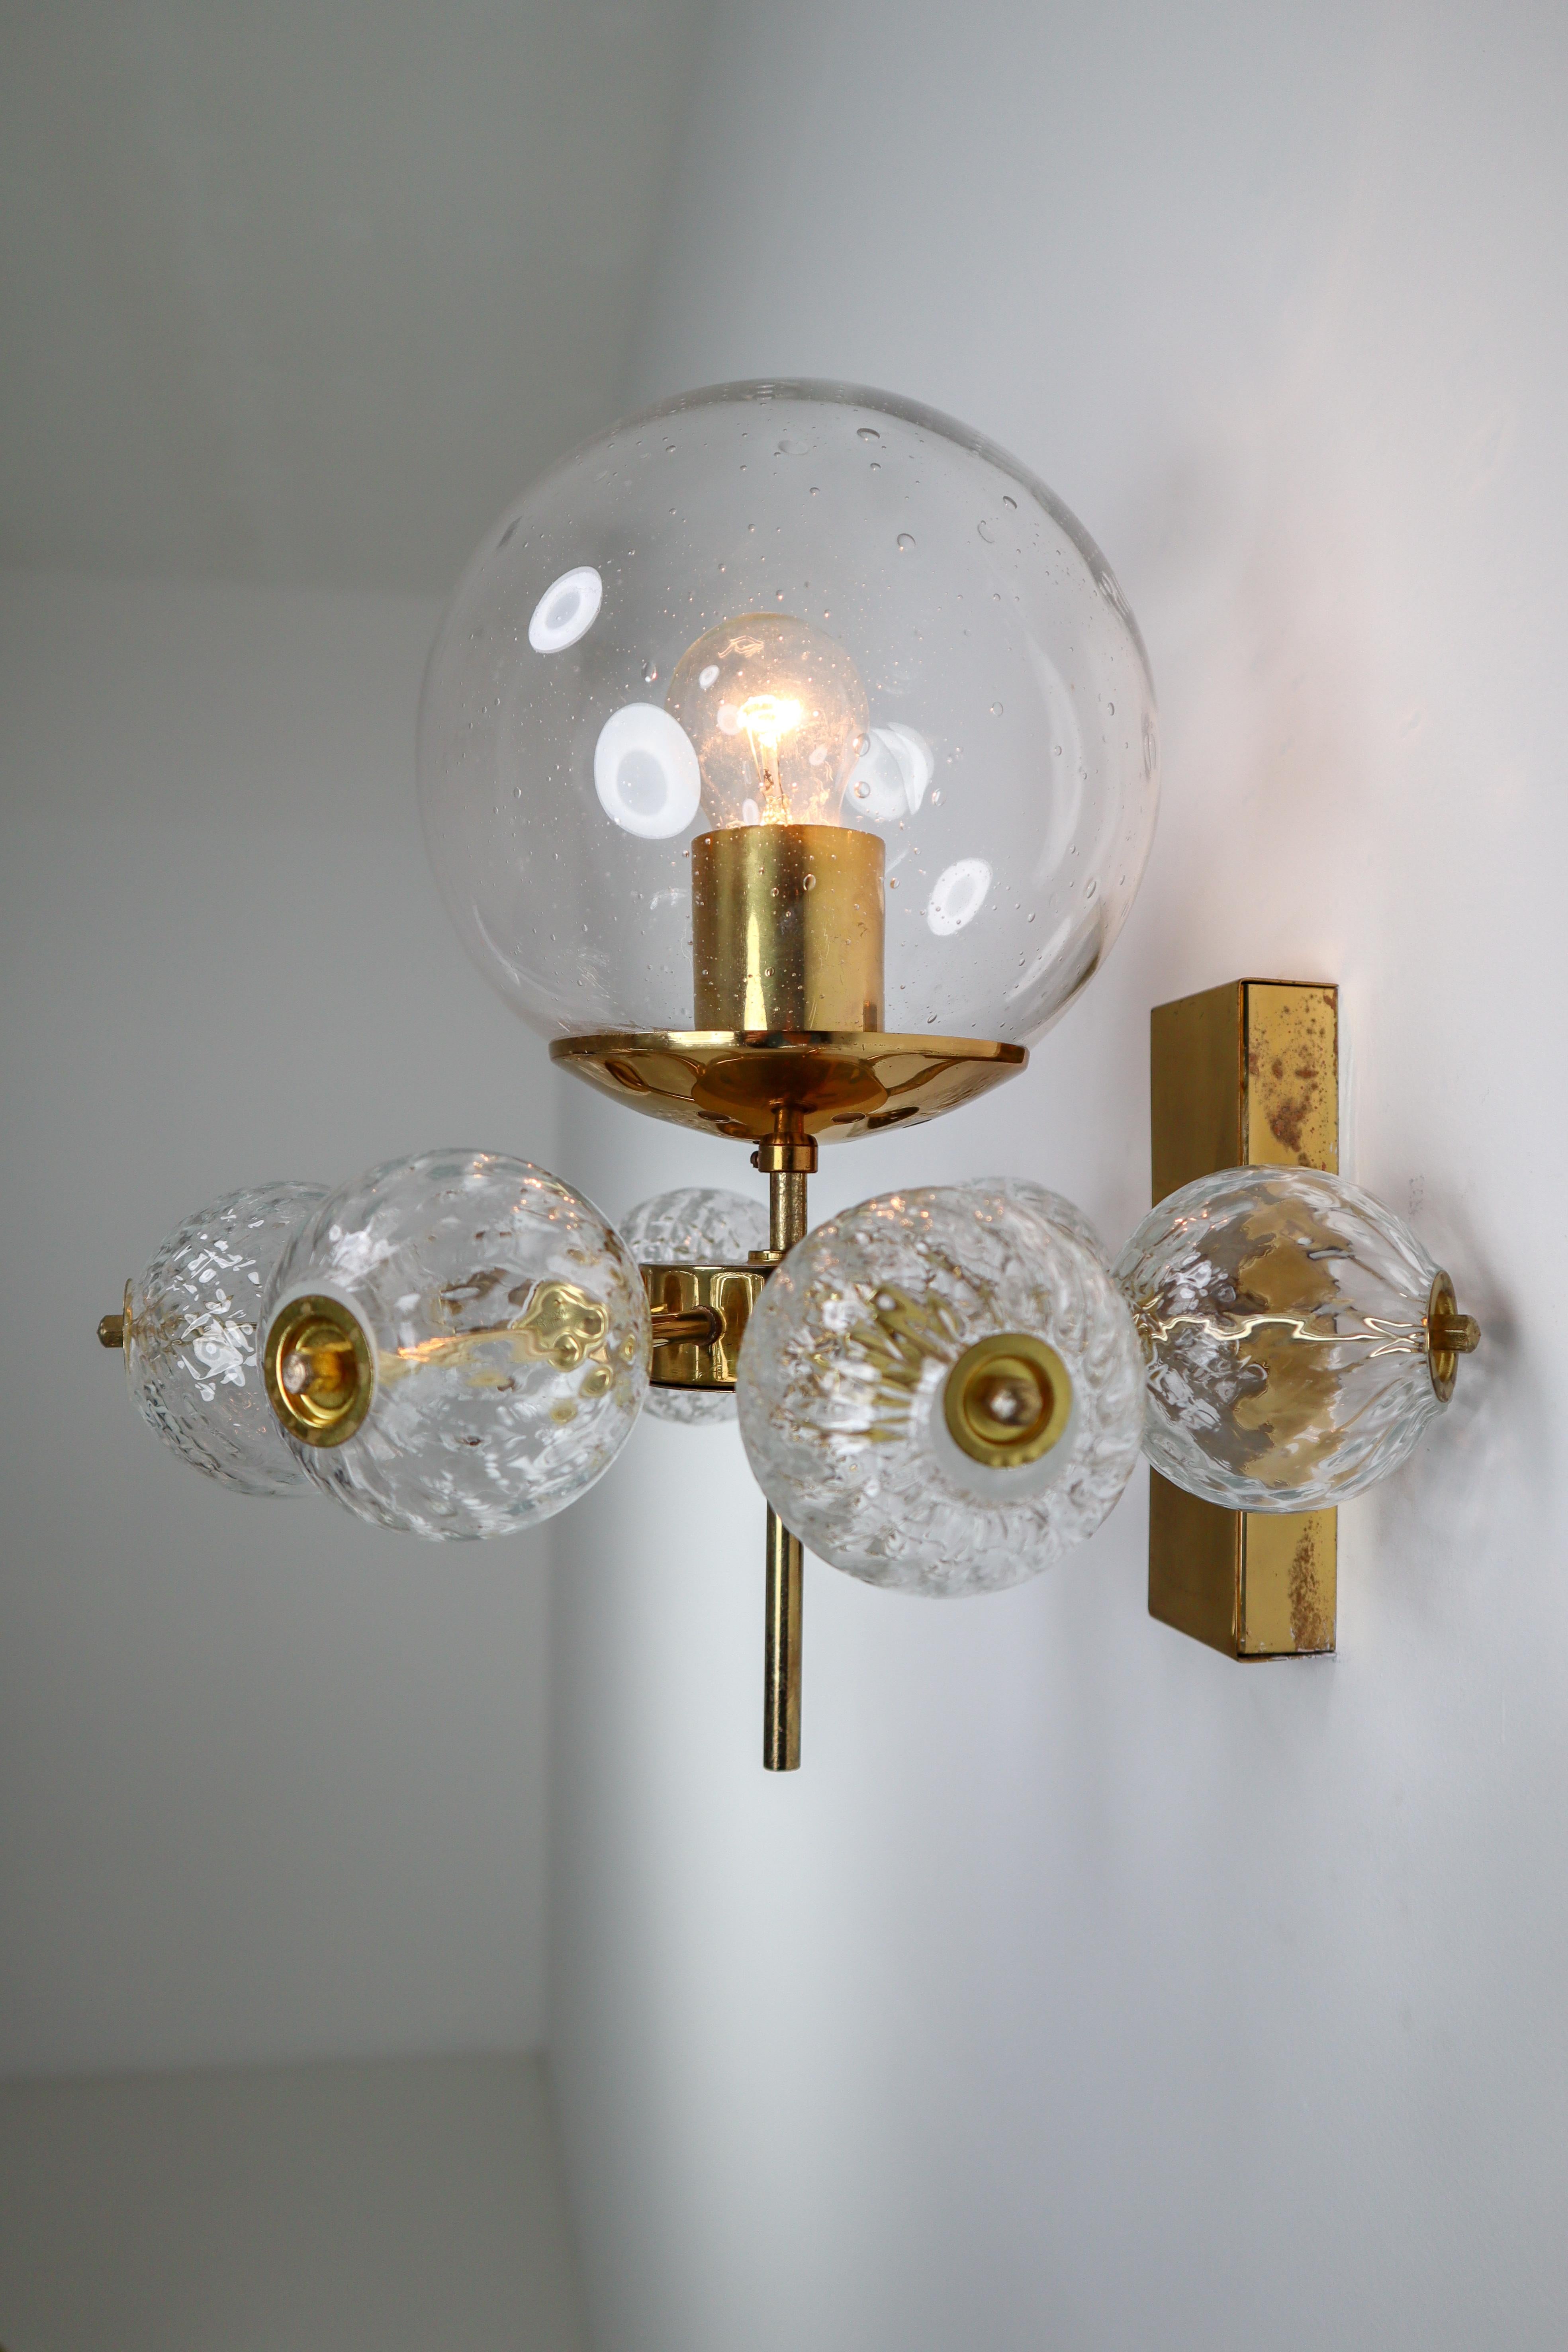 Large set of 20 hotel wall chandeliers with brass fixture and large hand blown glass. The scones are beautifully decorated thanks to the structured glass. The pleasant light it spreads is very atmospheric, these wall chandeliers will contribute to a